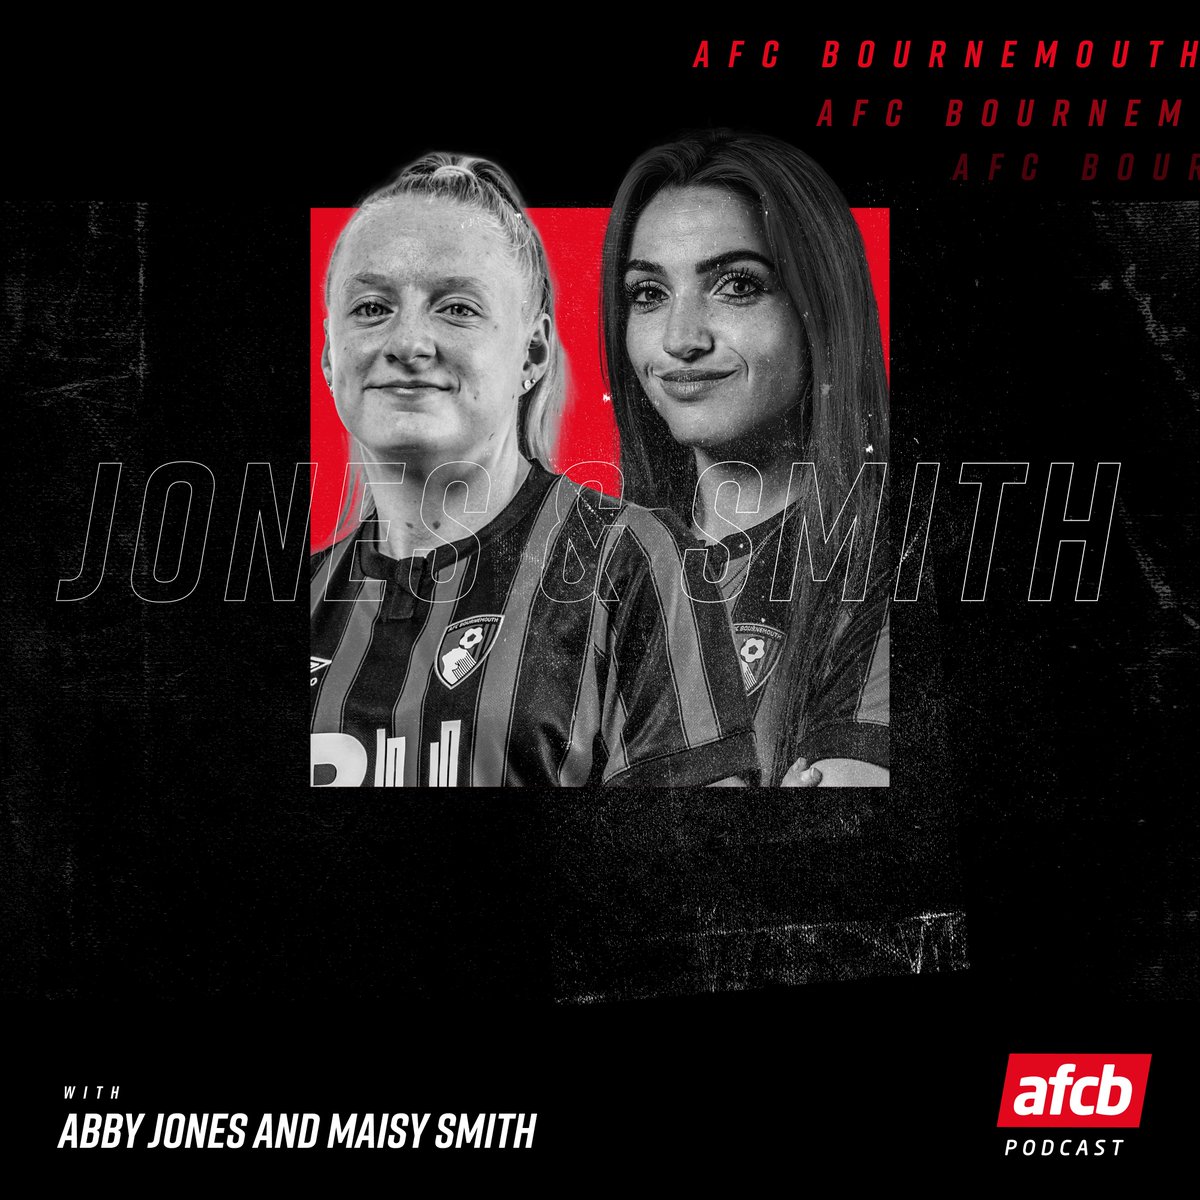 We're recording the next #afcbpod with @Jones2Abby and @MaisySmith6 🏆 Get your supporter questions in now and we'll ask the best of them! 👇